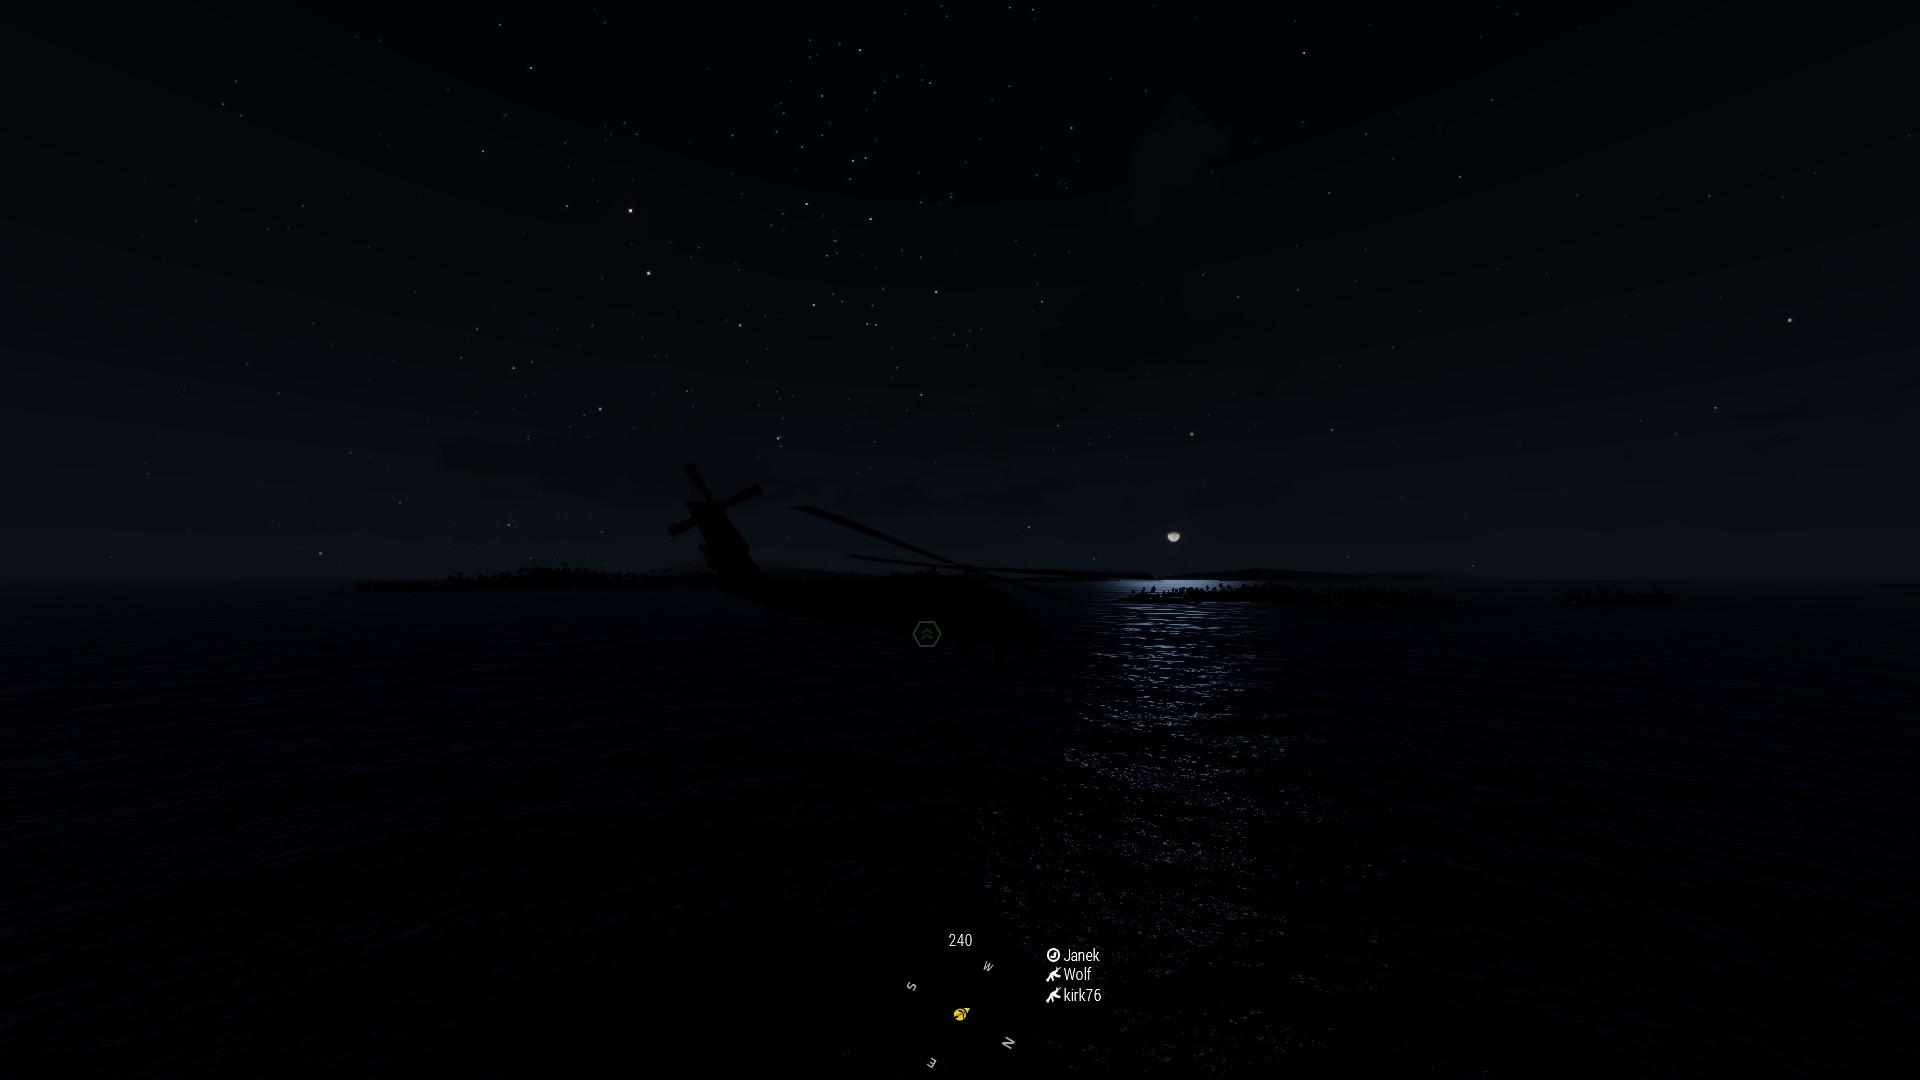 Swedish "speshal" forces in the moonlight